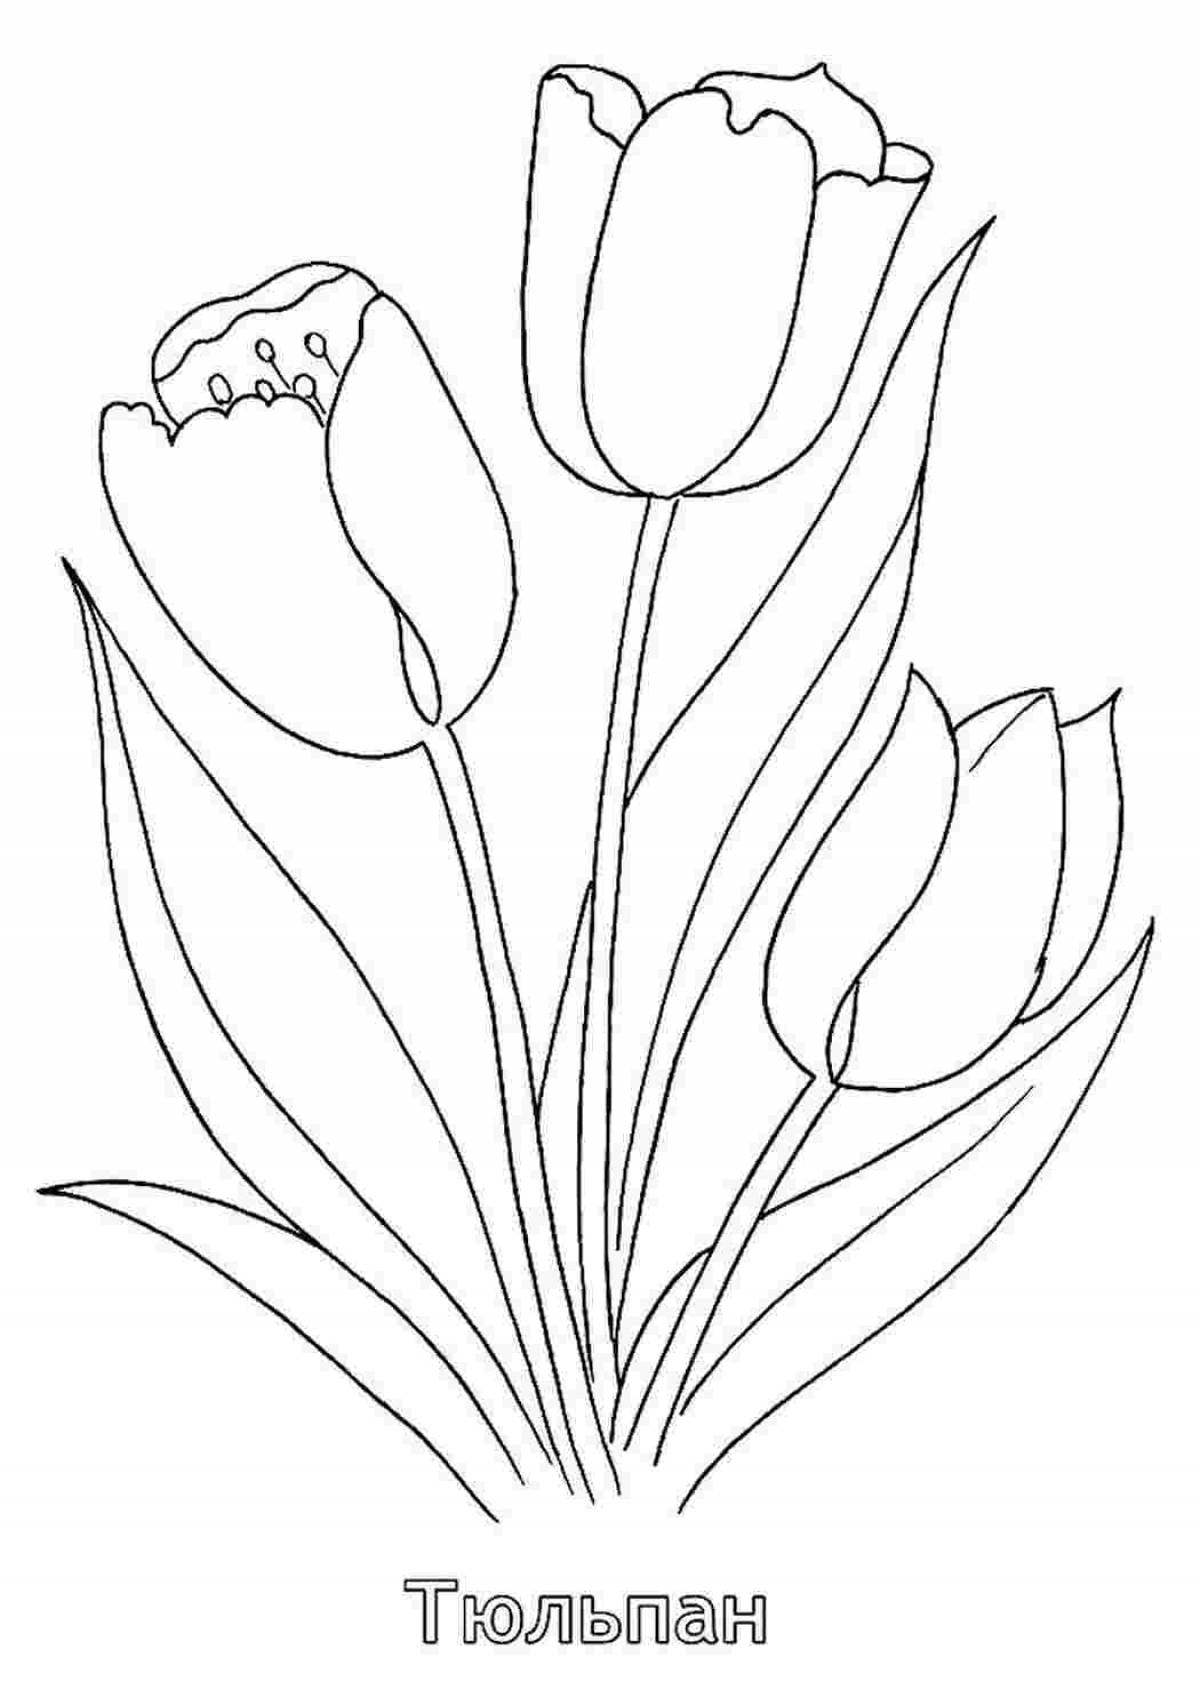 Glowing tulips coloring book for children 5-6 years old